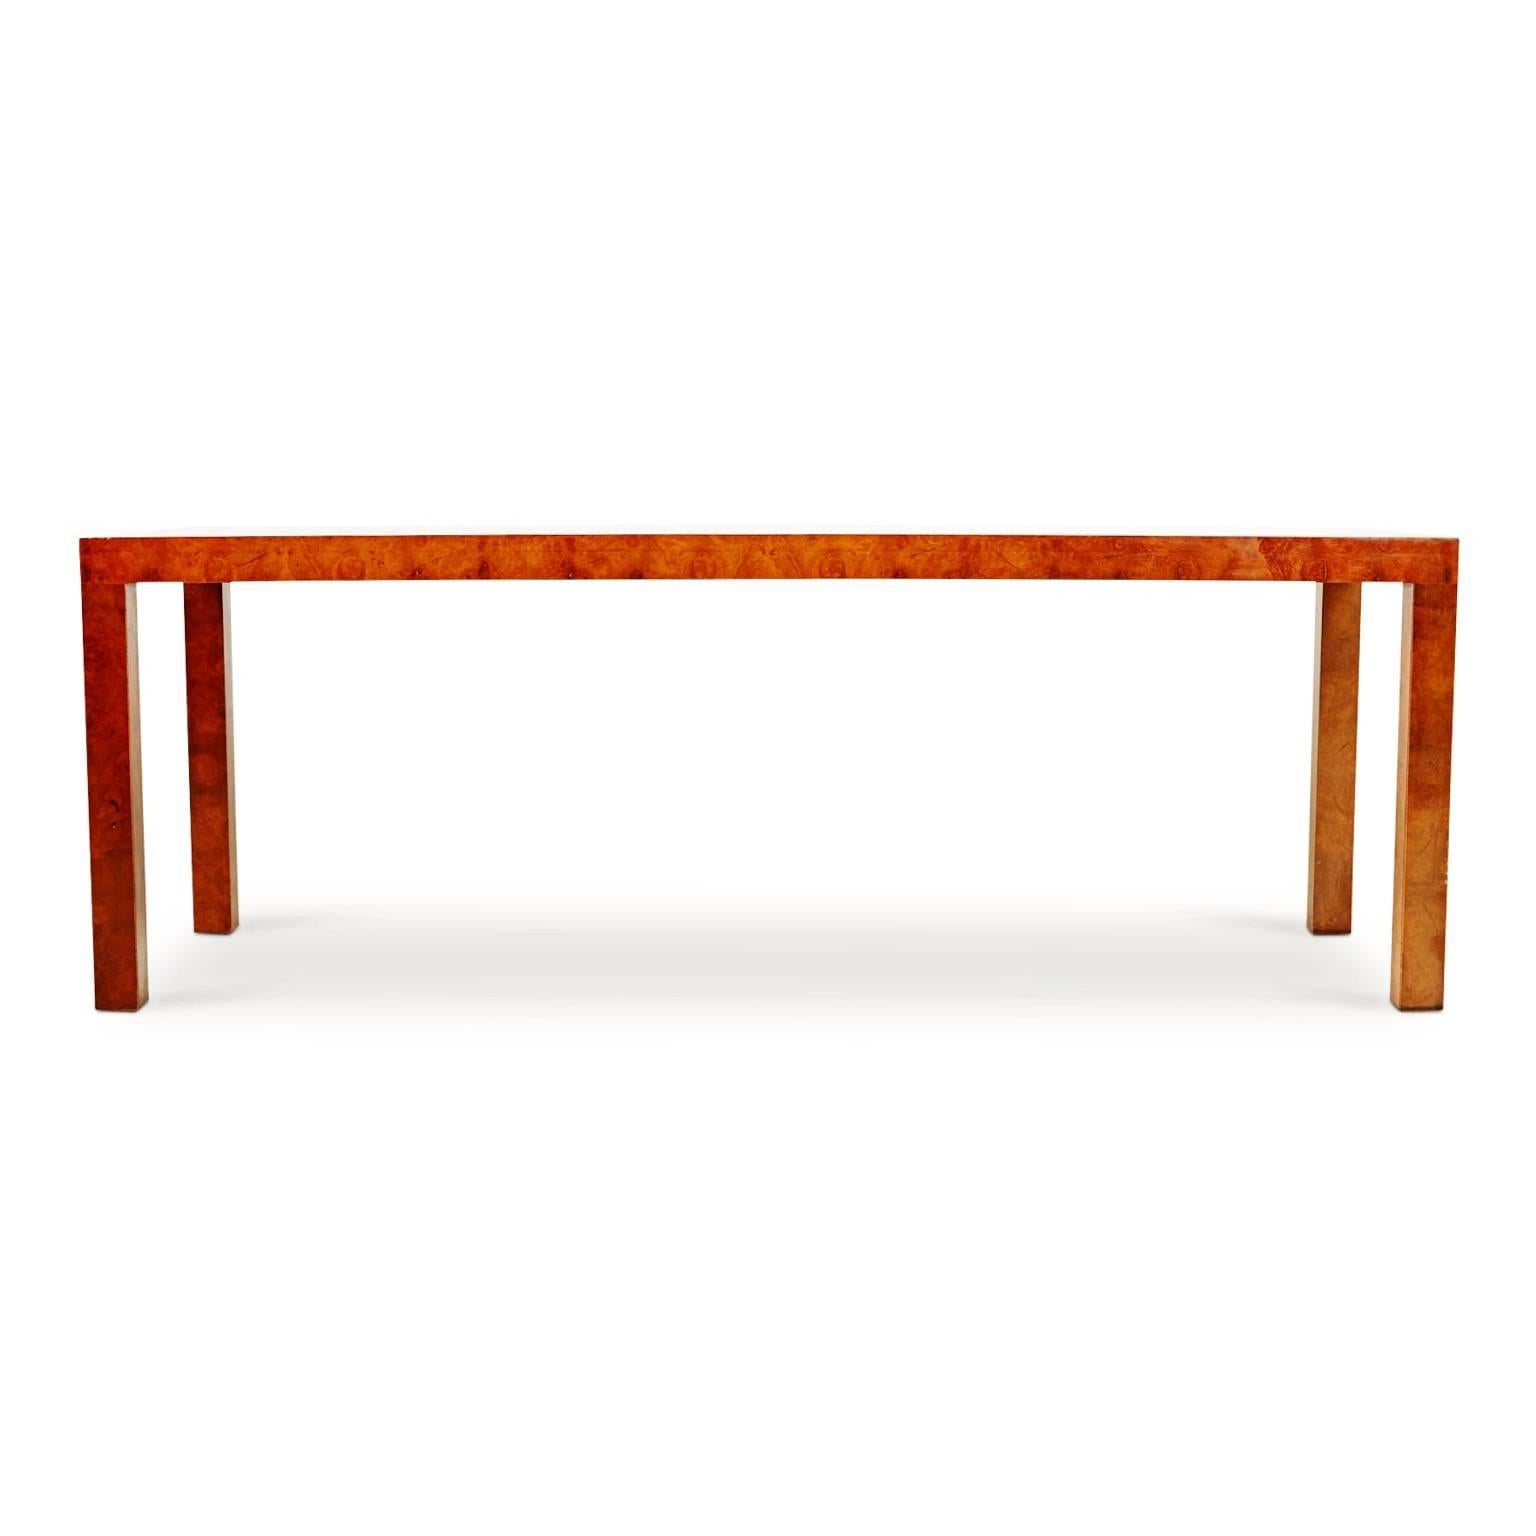 Elegantly crafted console table, media table or sofa table (depending on how you wish to use it) by Milo Baughman for Directional, circa 1980. Comprised of burled walnut veneer with beautiful grain variation. The veneer at the front features a